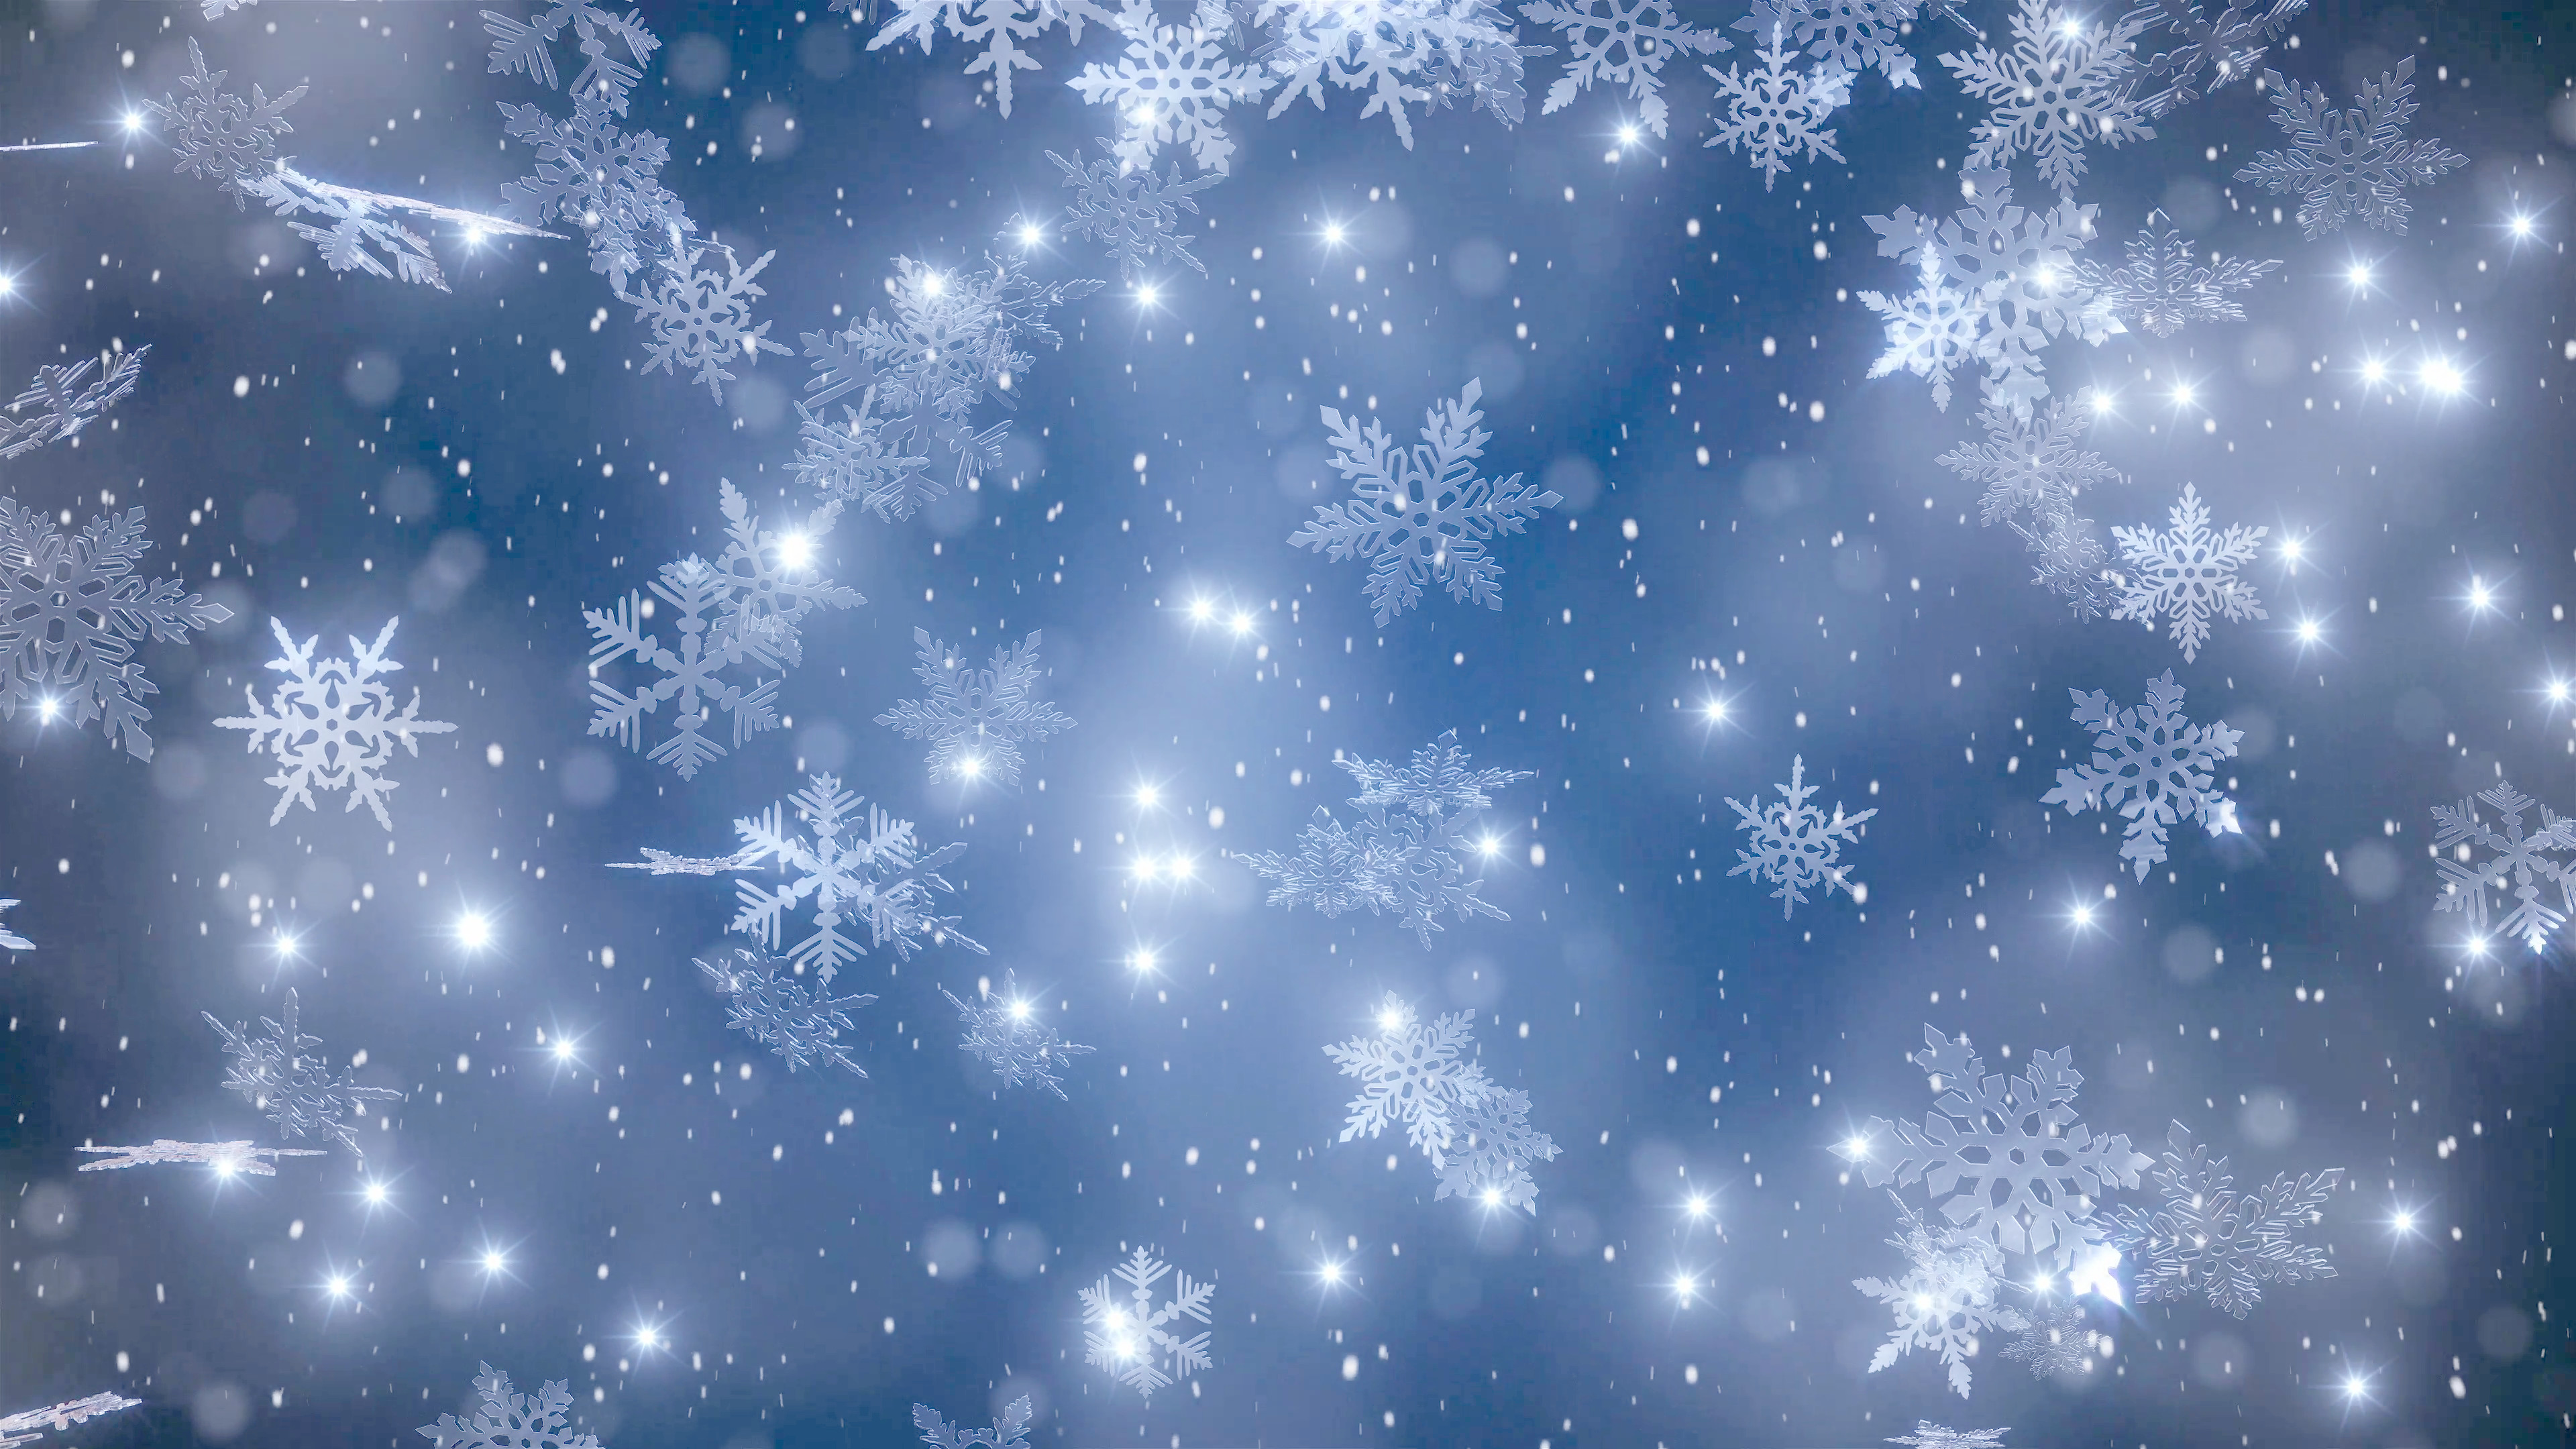 3840x2160 Christmas background with snowflakes - falling snow Motion Background -  VideoBlocks